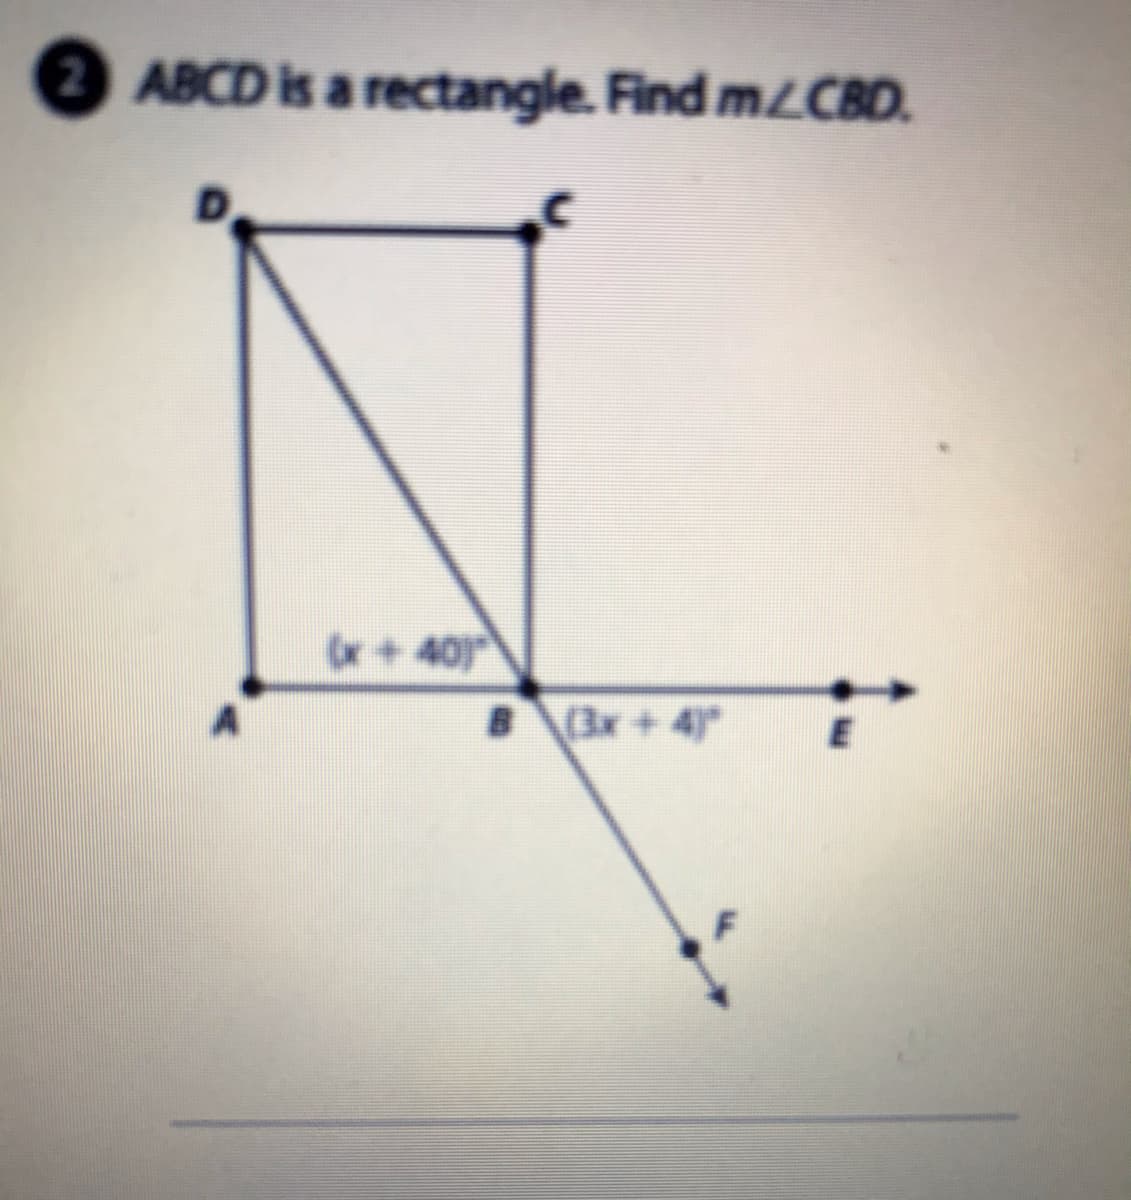 2ABCD is a rectangle. Find mLCBD.
x+40)
BBx + 4)*
